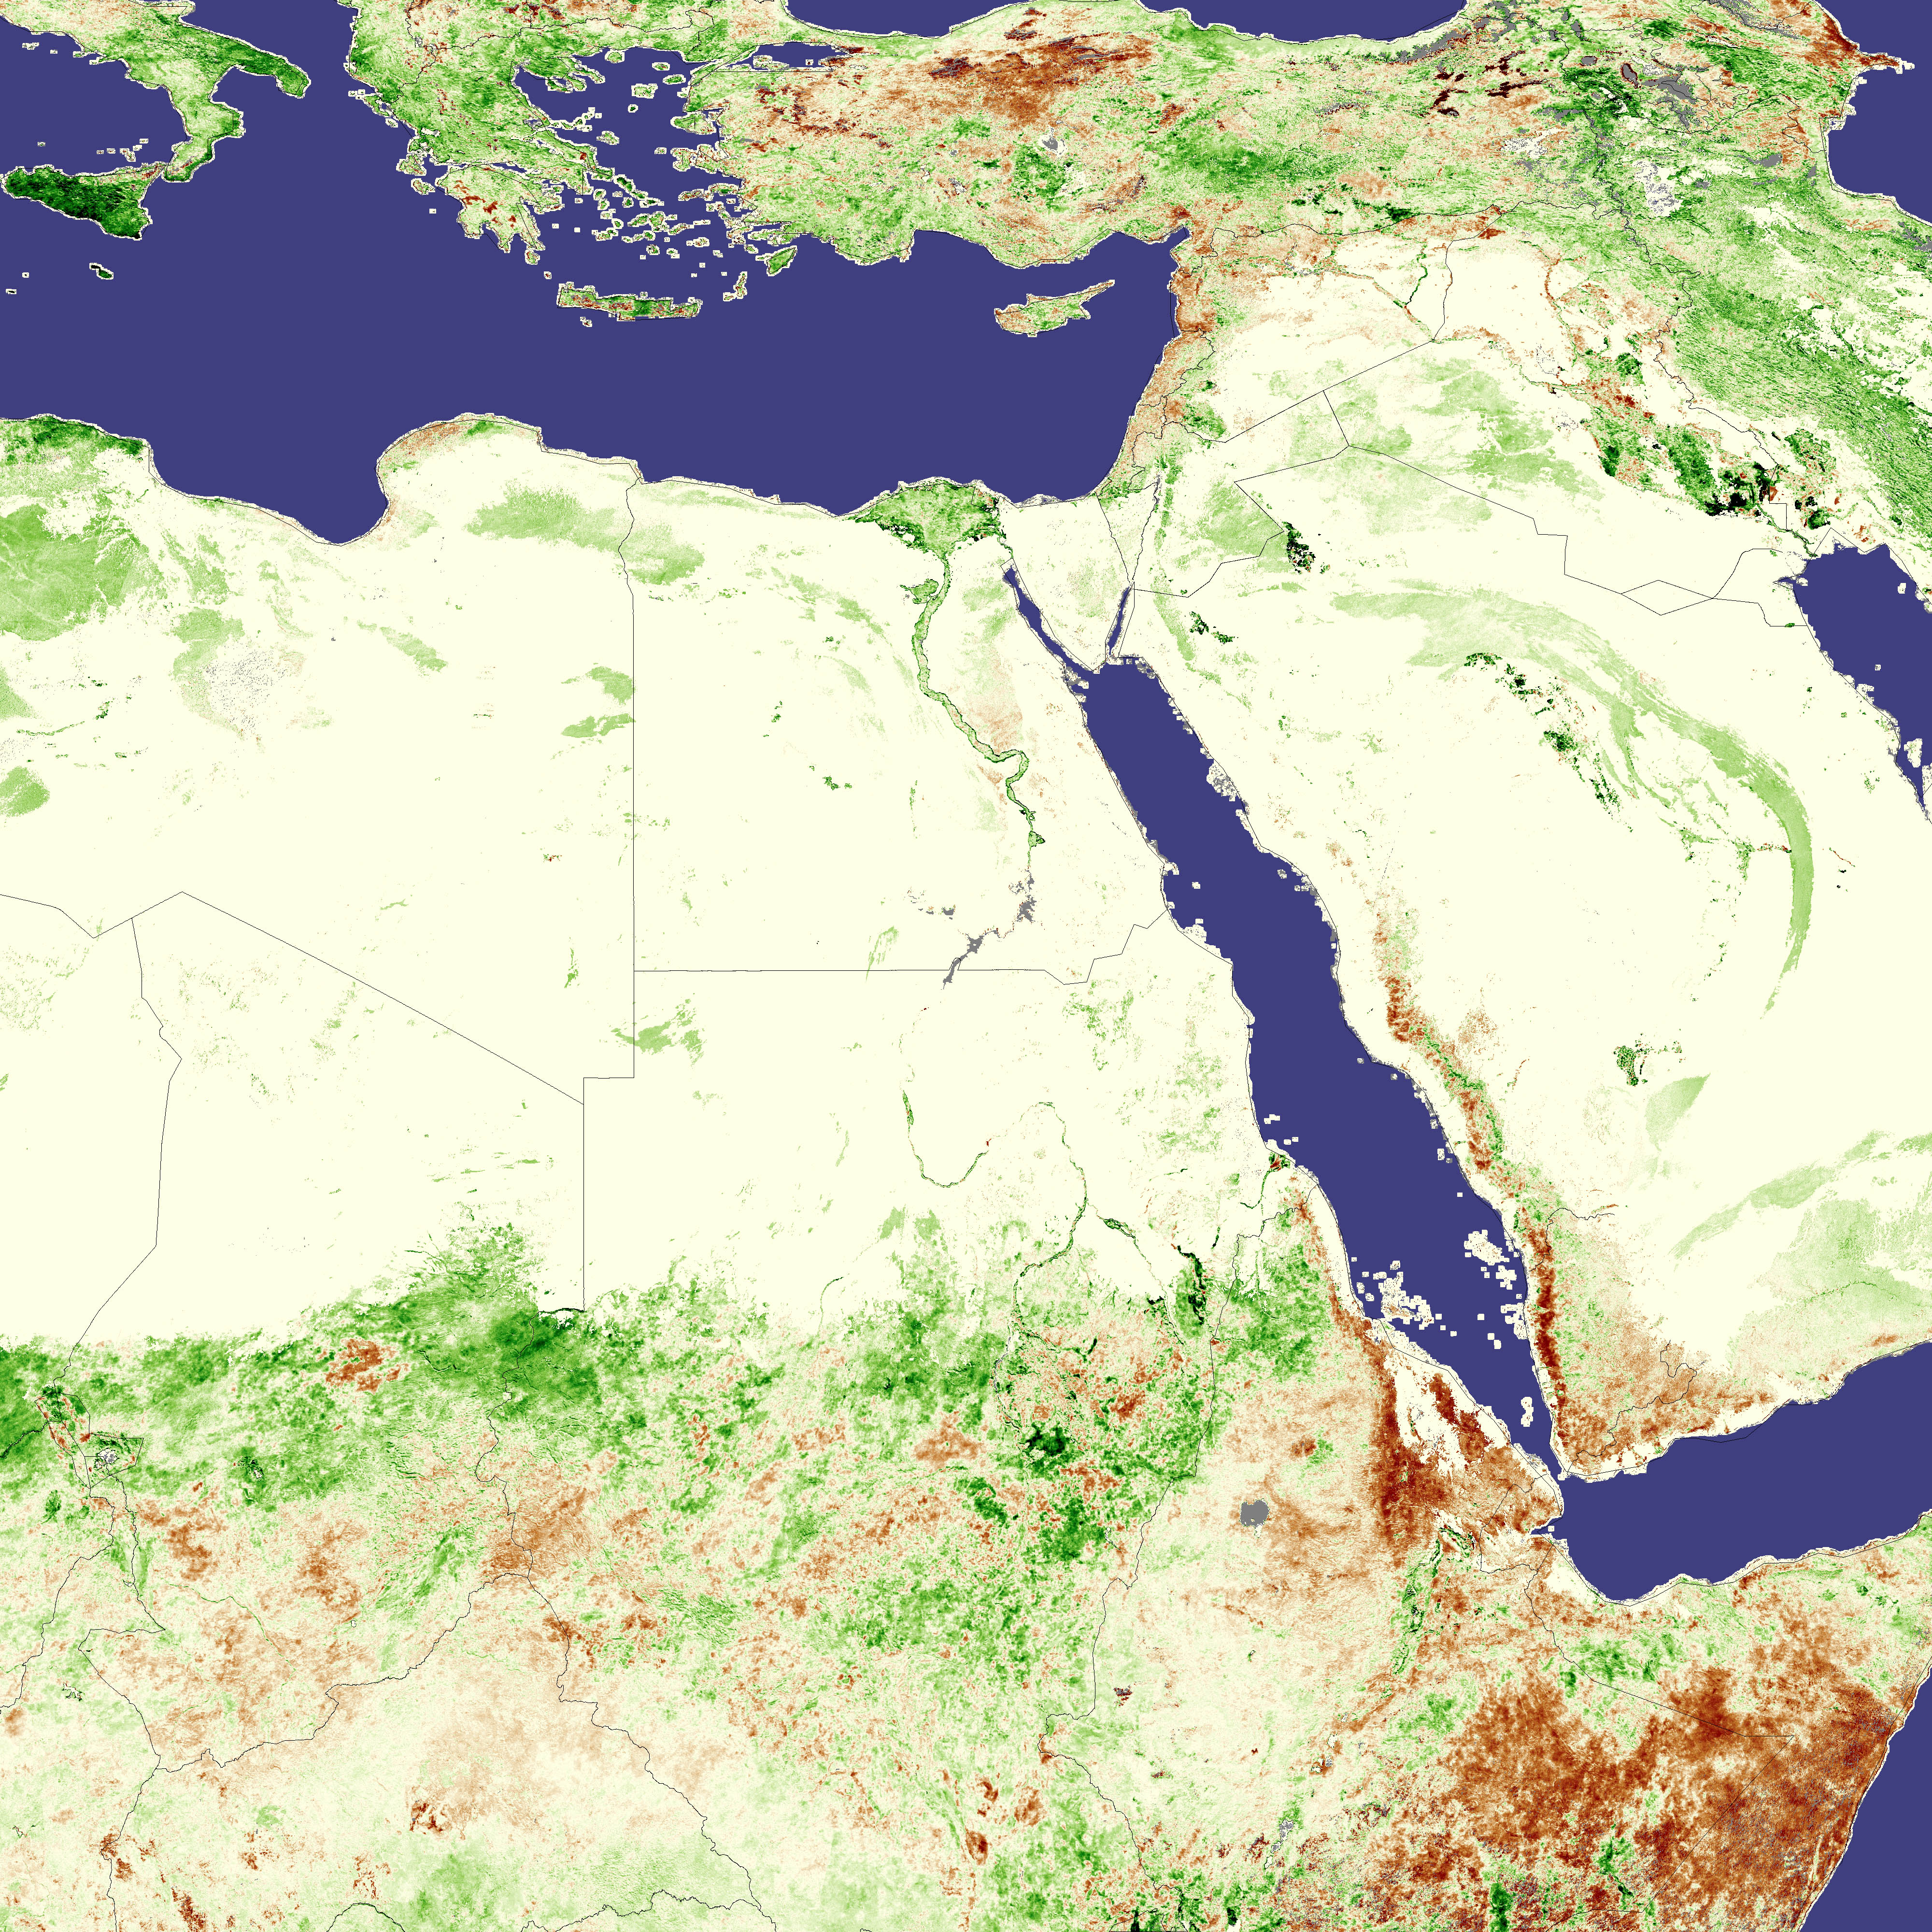 Lush Vegetation Fuels Locust Outbreak in Sudan - related image preview